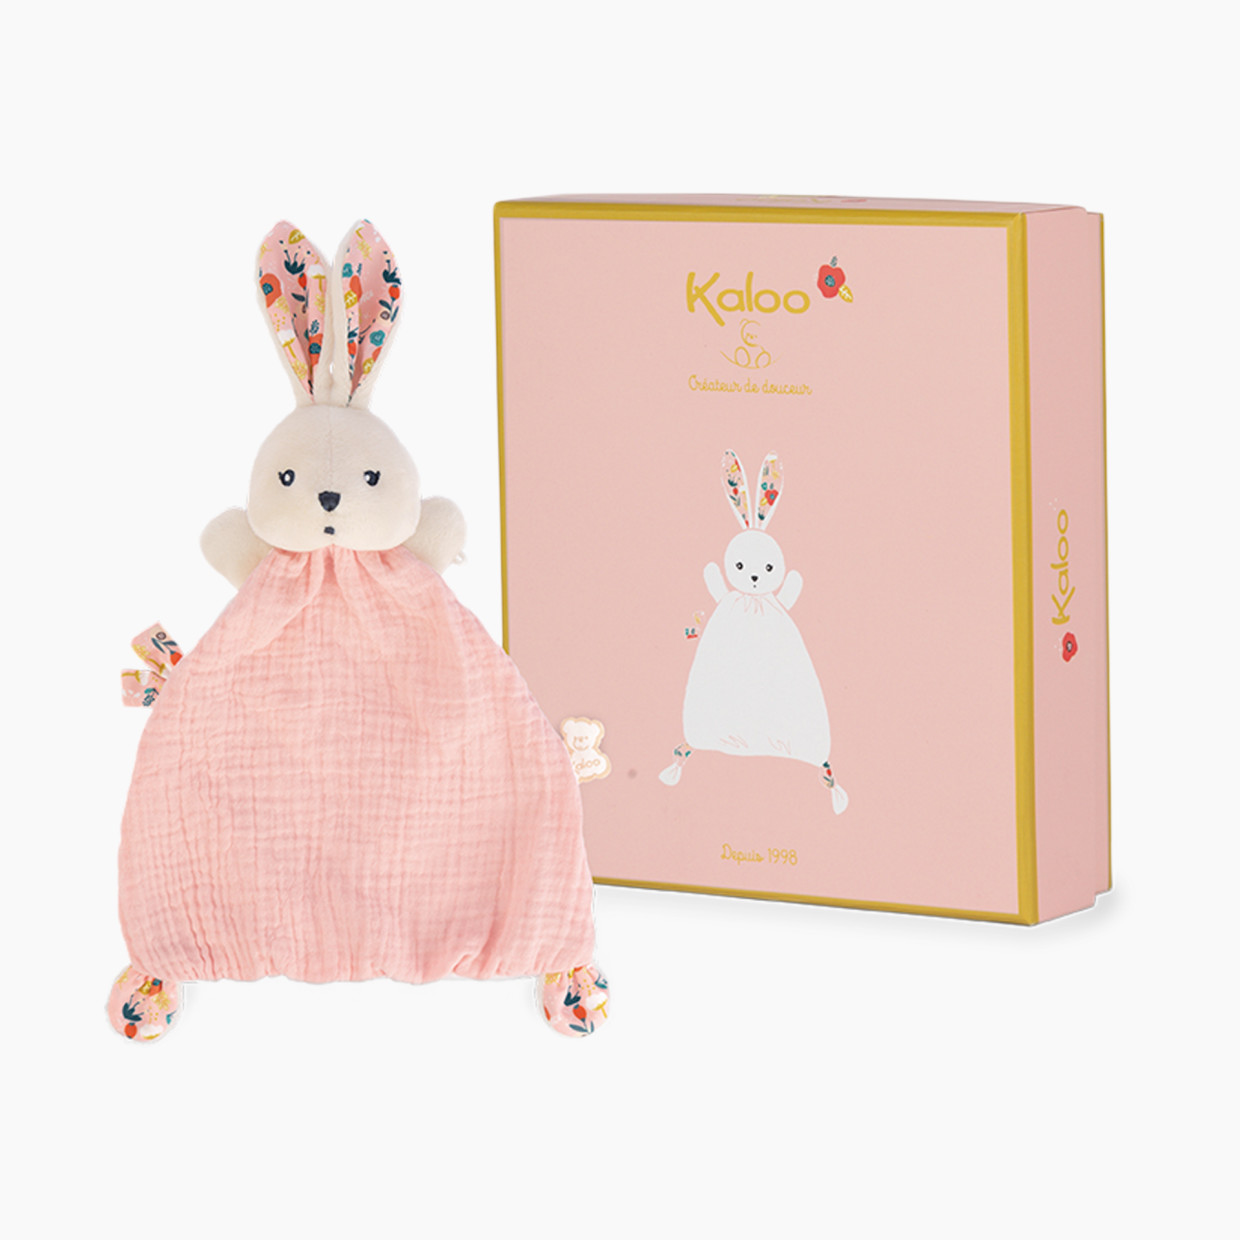  Kaloo Doudou Rabbit - 8.7” My First Lovey - Rabbit Dove - Gift  Box Included - Machine Washable - Ages 0+ - K969947 : Toys & Games